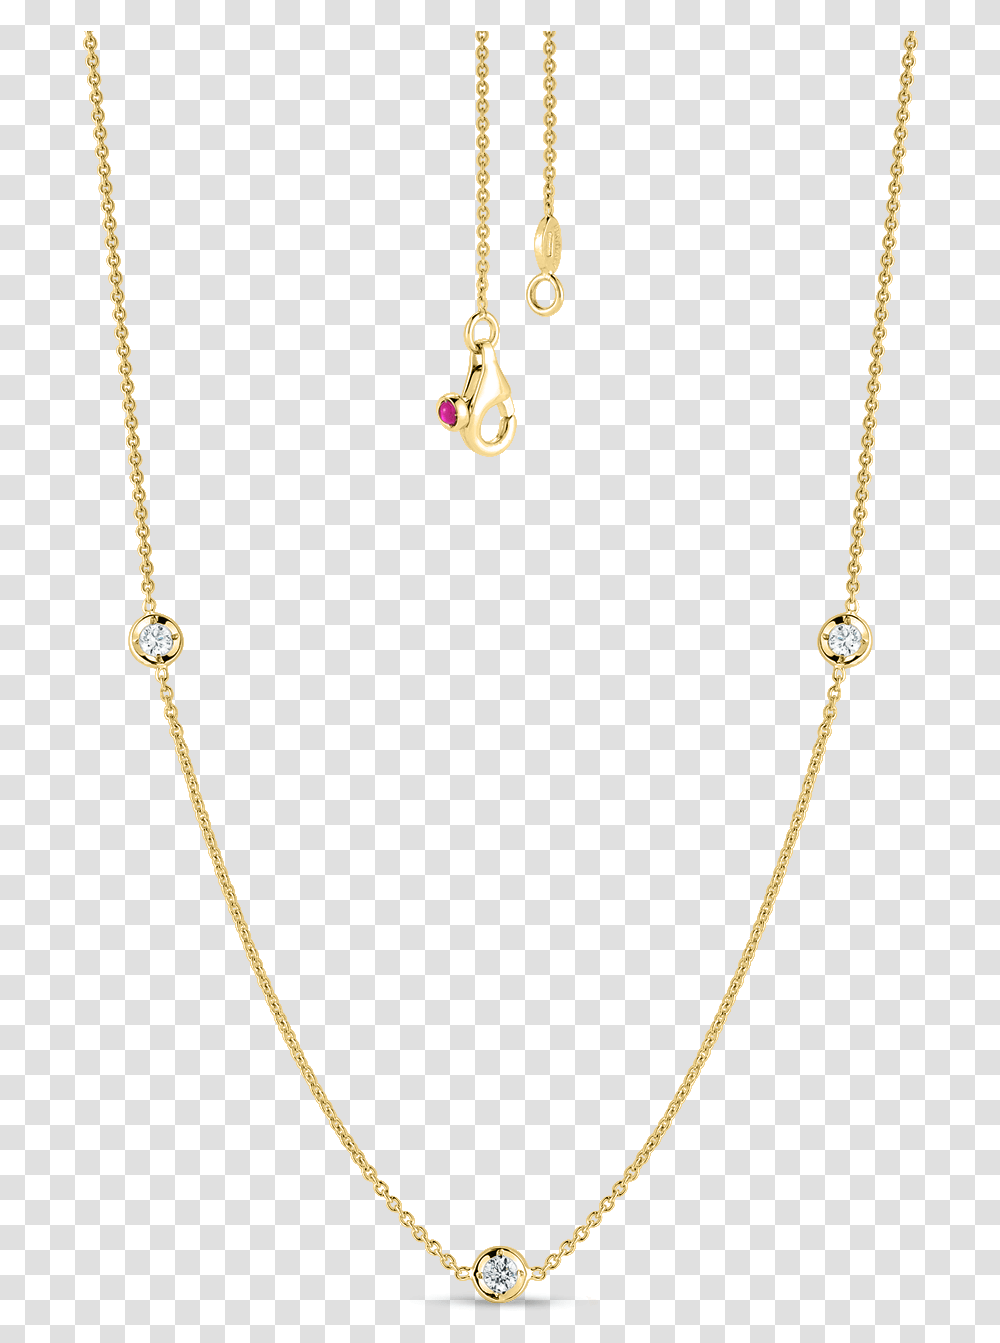 Necklace, Accessories, Accessory, Jewelry, Chain Transparent Png